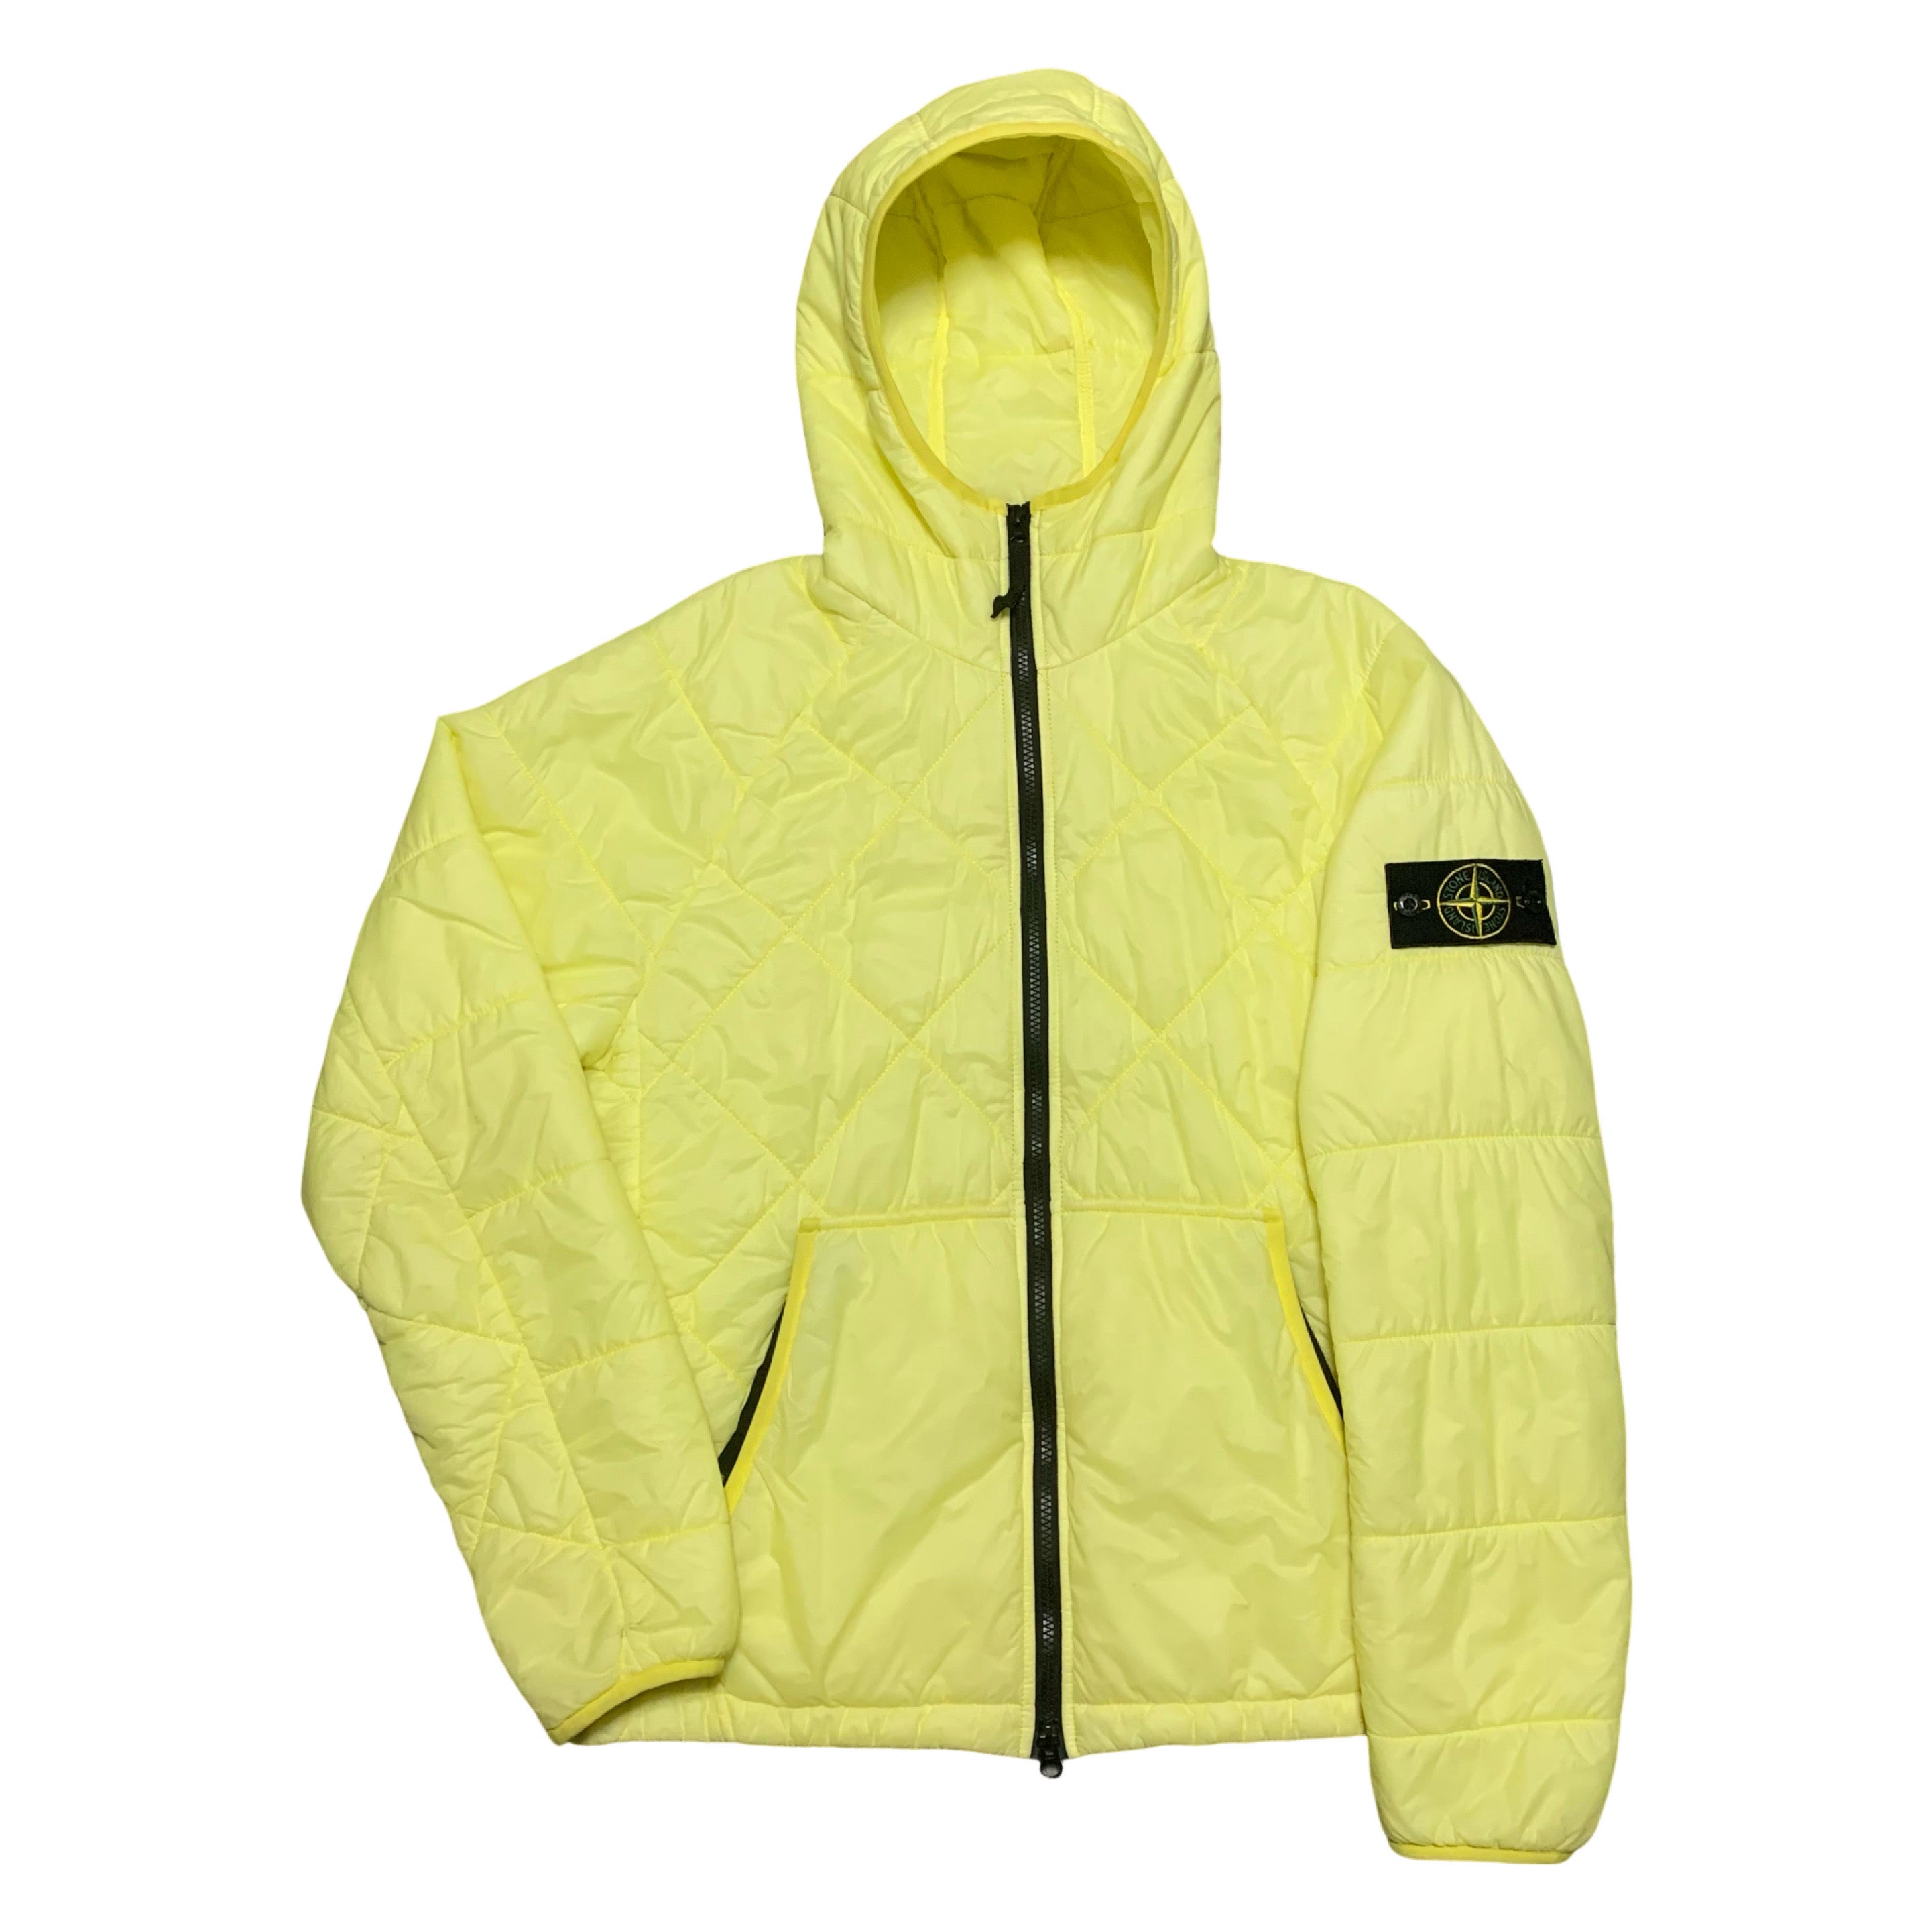 Stone Island Medium Yellow Garment Dyed Quilted Micro Yarn Hooded Jacket 2019